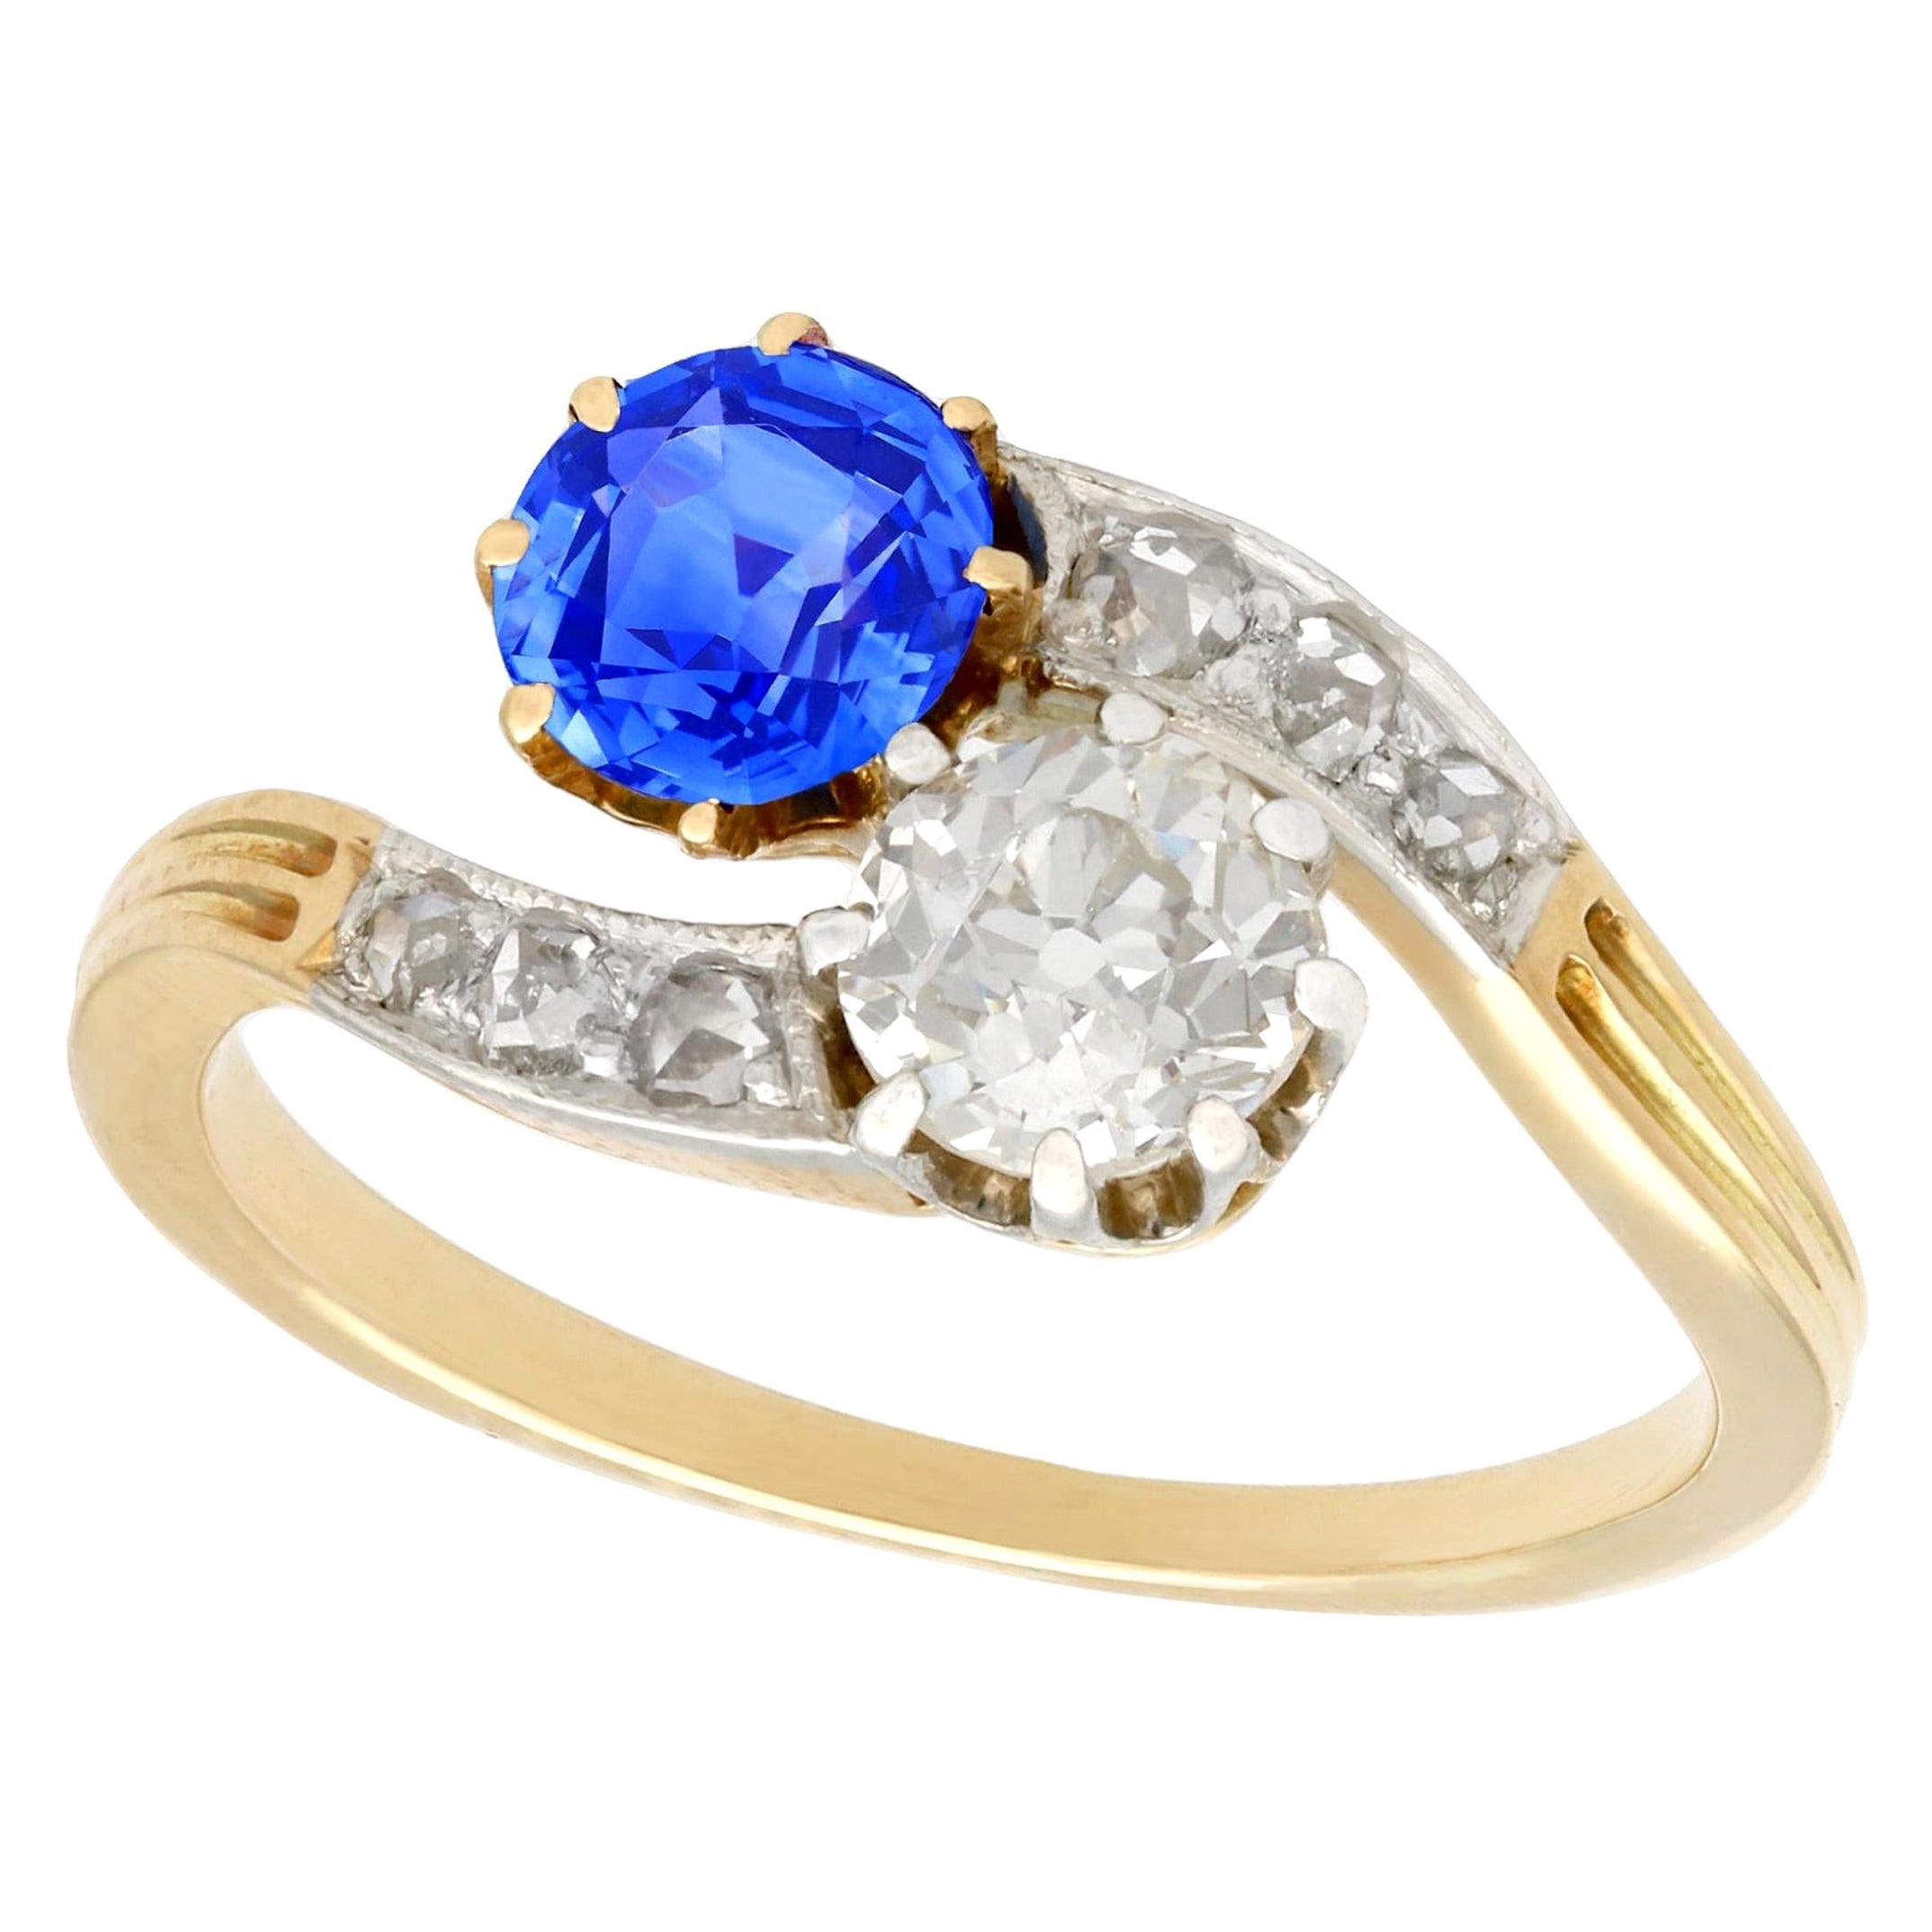 1910 Antique Sapphire and Diamond Yellow Gold Twist Ring